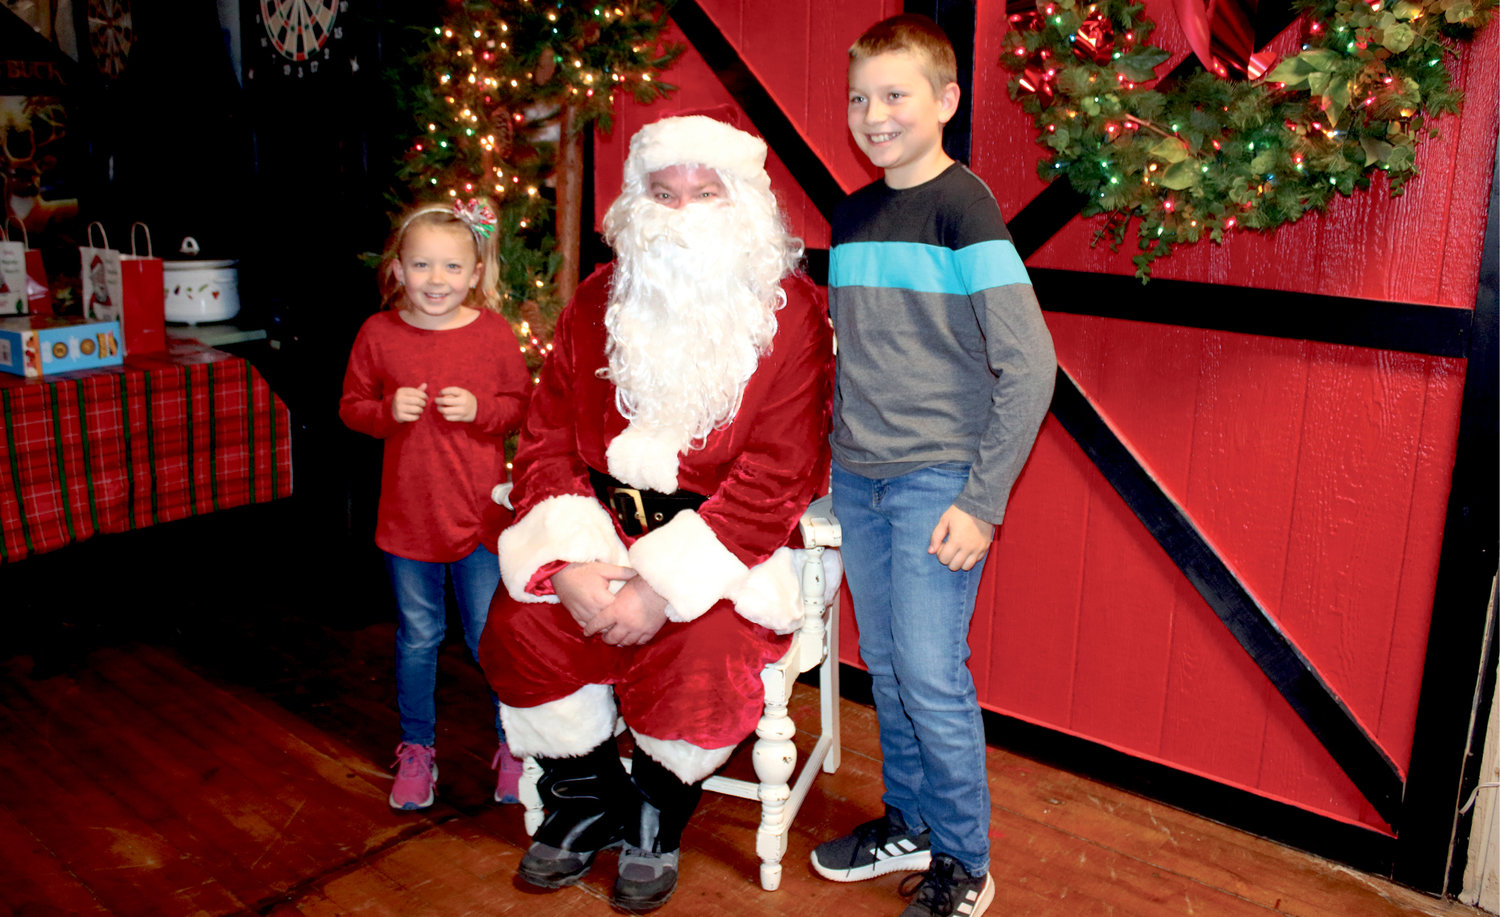 Above: Kinnley, left, and Kashden Palmlund pose for a photo with Santa after telling him their wishes for this year.